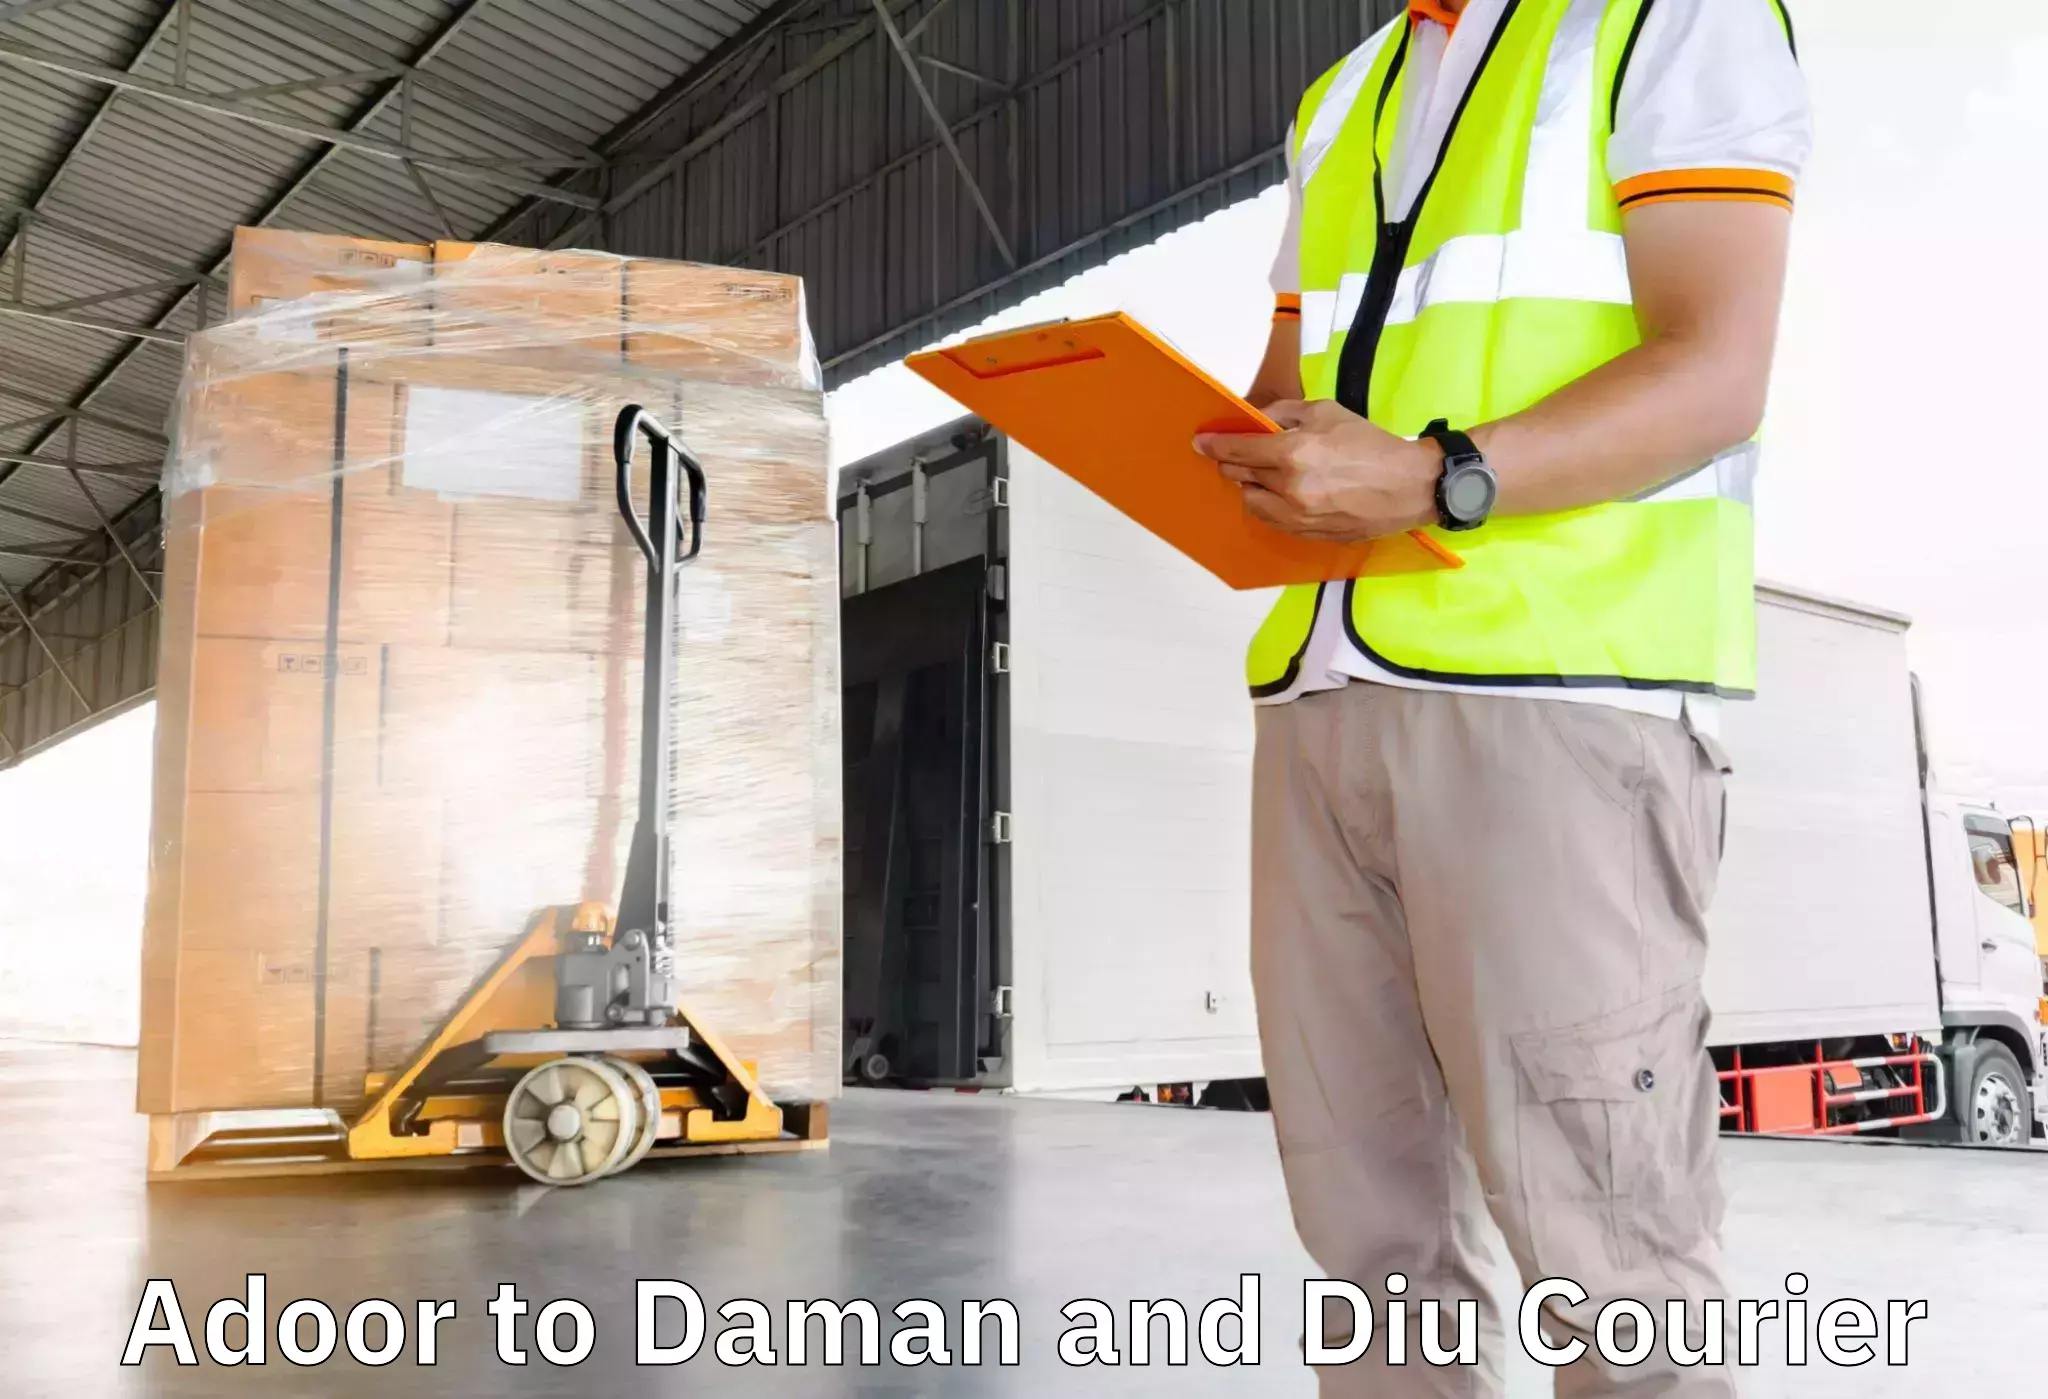 Efficient packing and moving Adoor to Daman and Diu